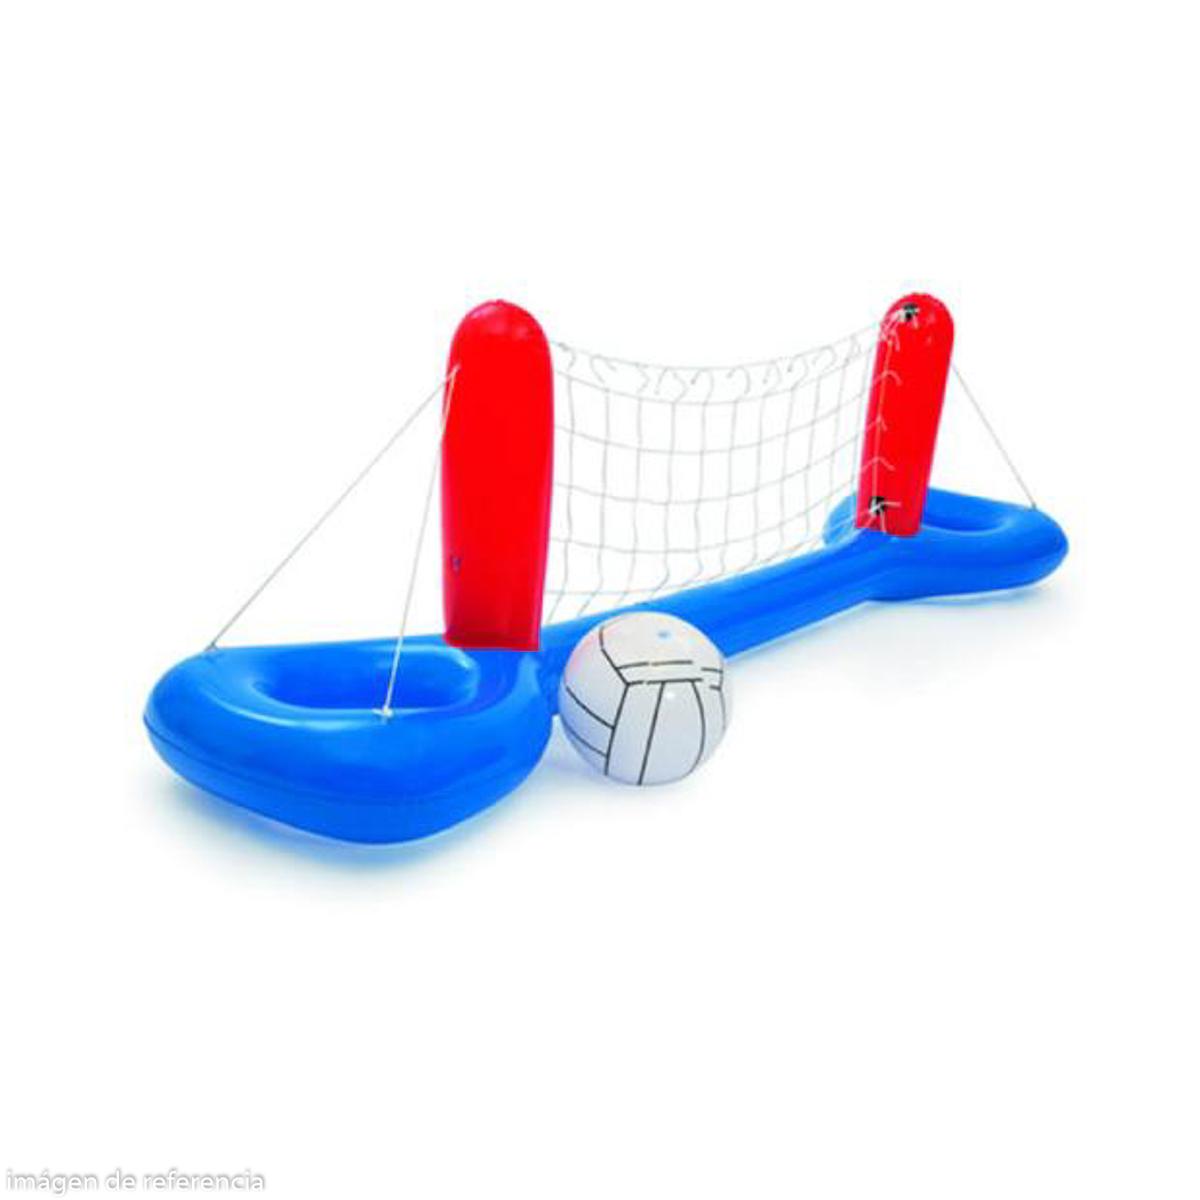 RED VOLLEYBALL P/PISCINA INFLABLE